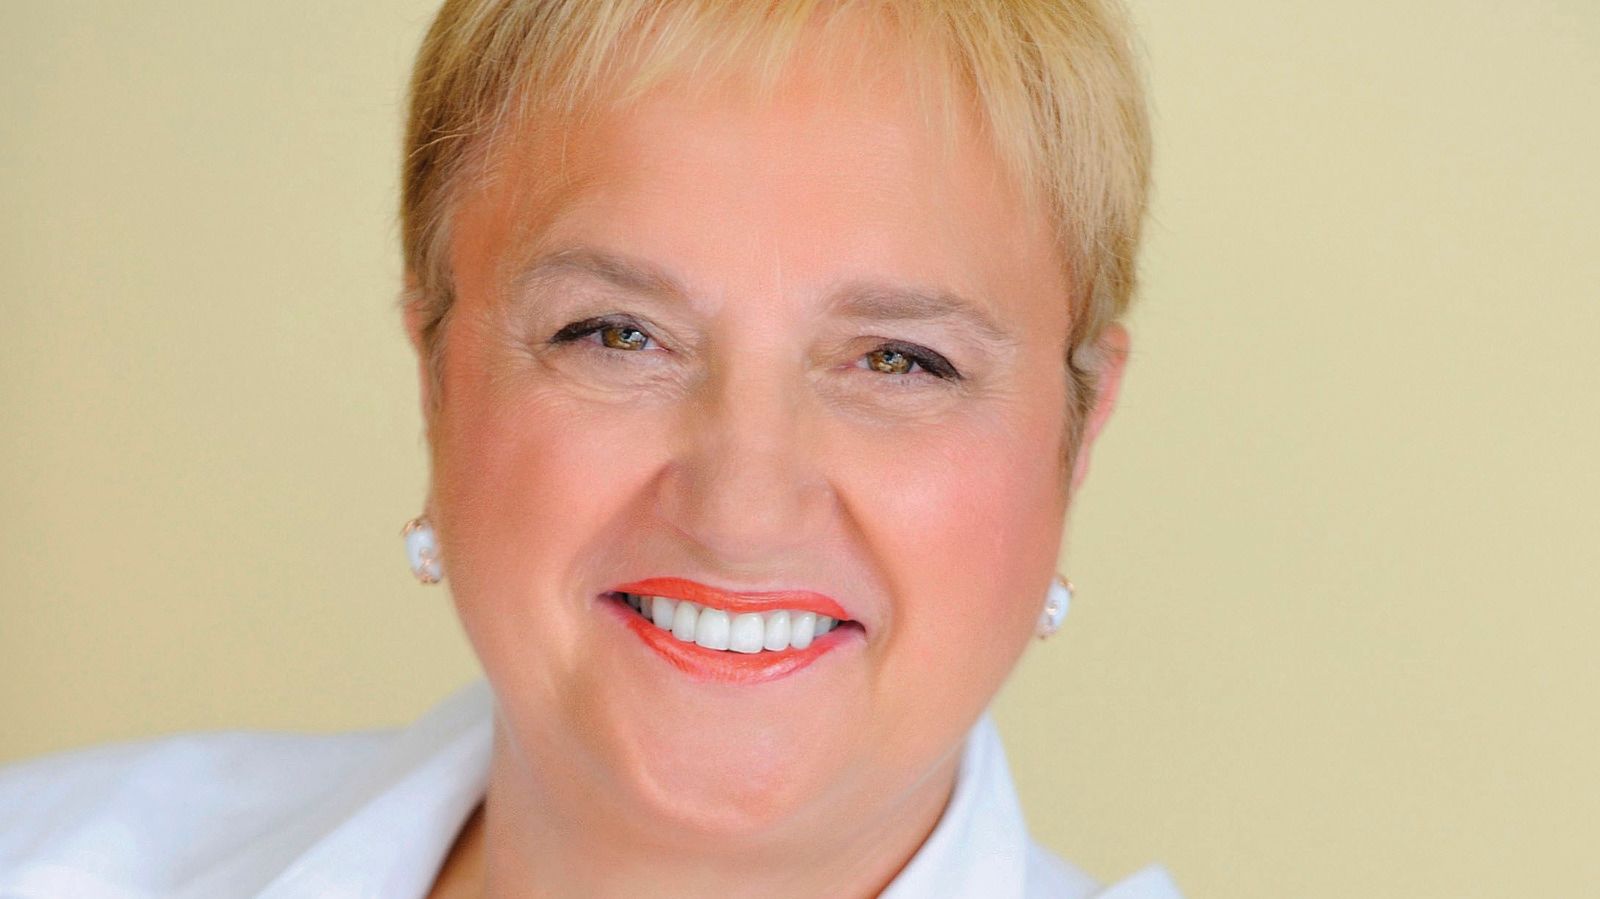 Lidia Bastianich On The Skills Boomers Bring To The Kitchen In The New Season Of MasterChef - Exclusive Interview